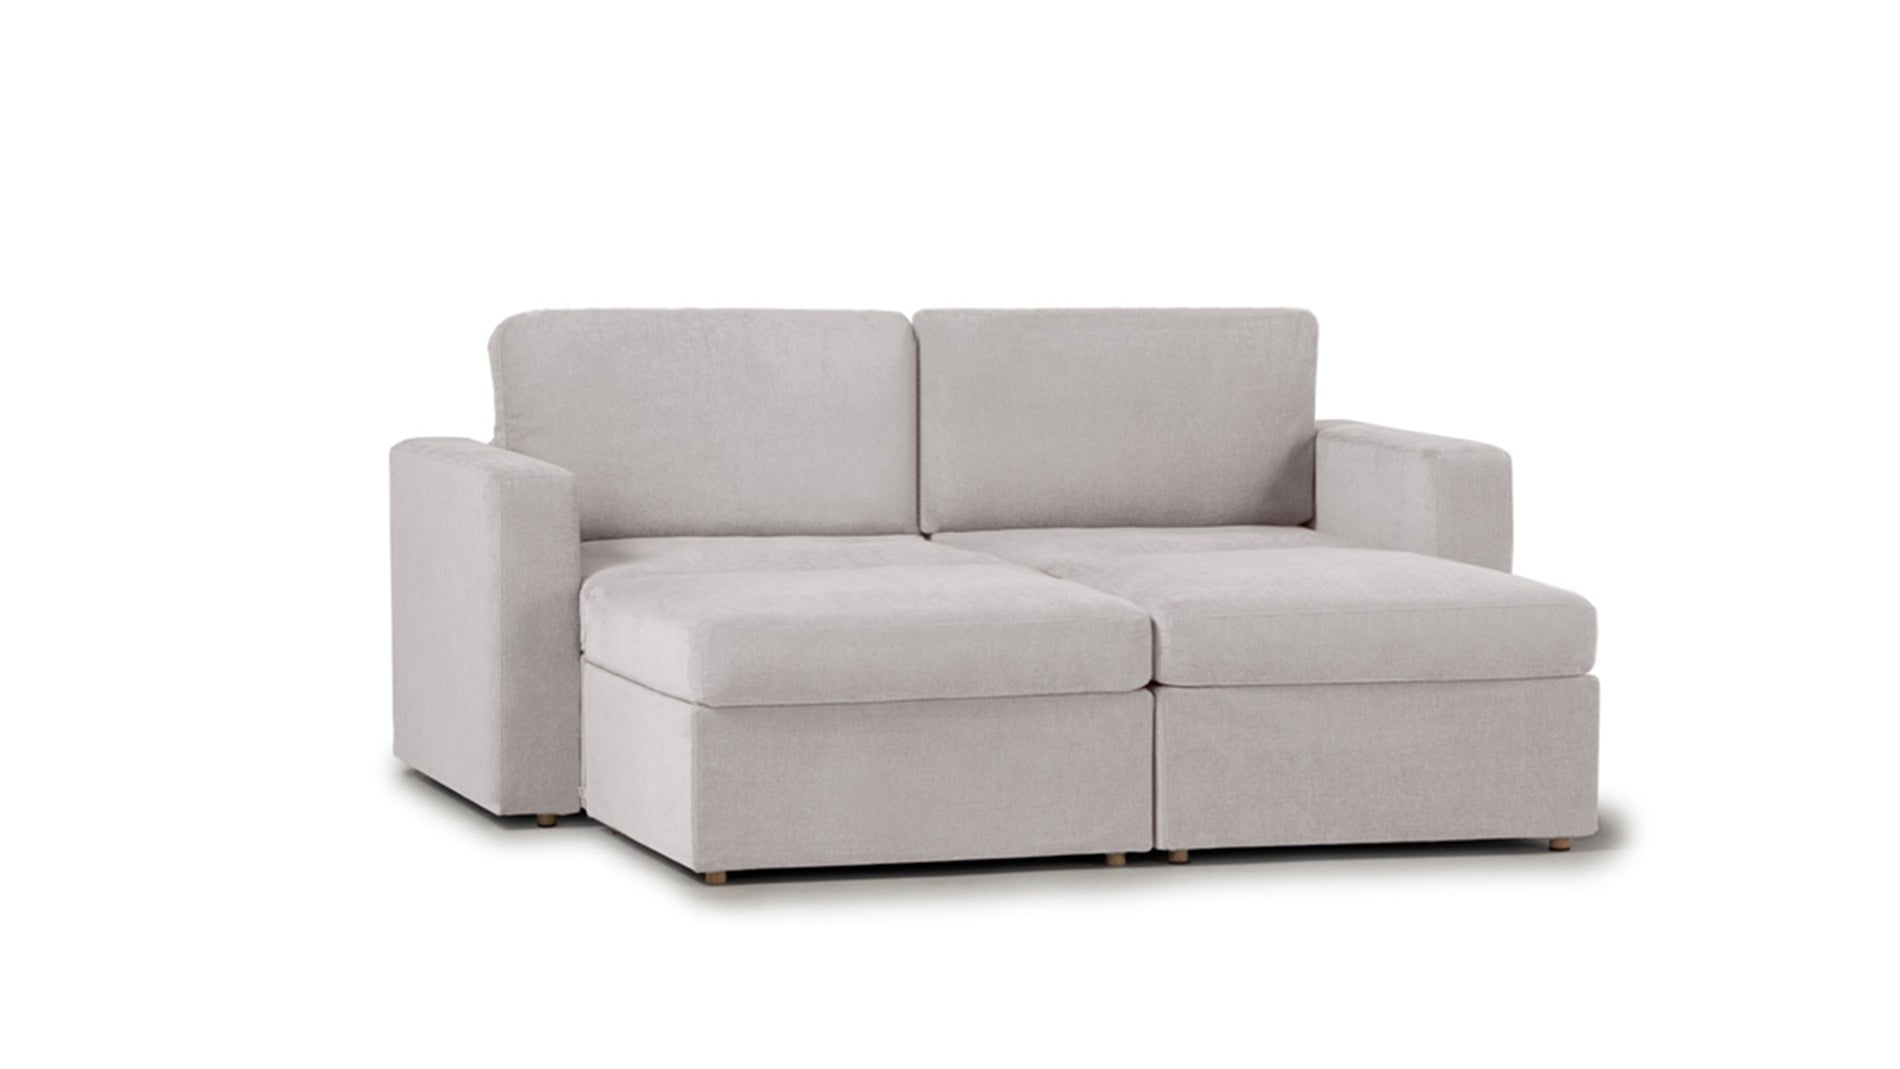 Two Seat Loveseat Sofa Upholstered Lounge Sofa Couch with 2